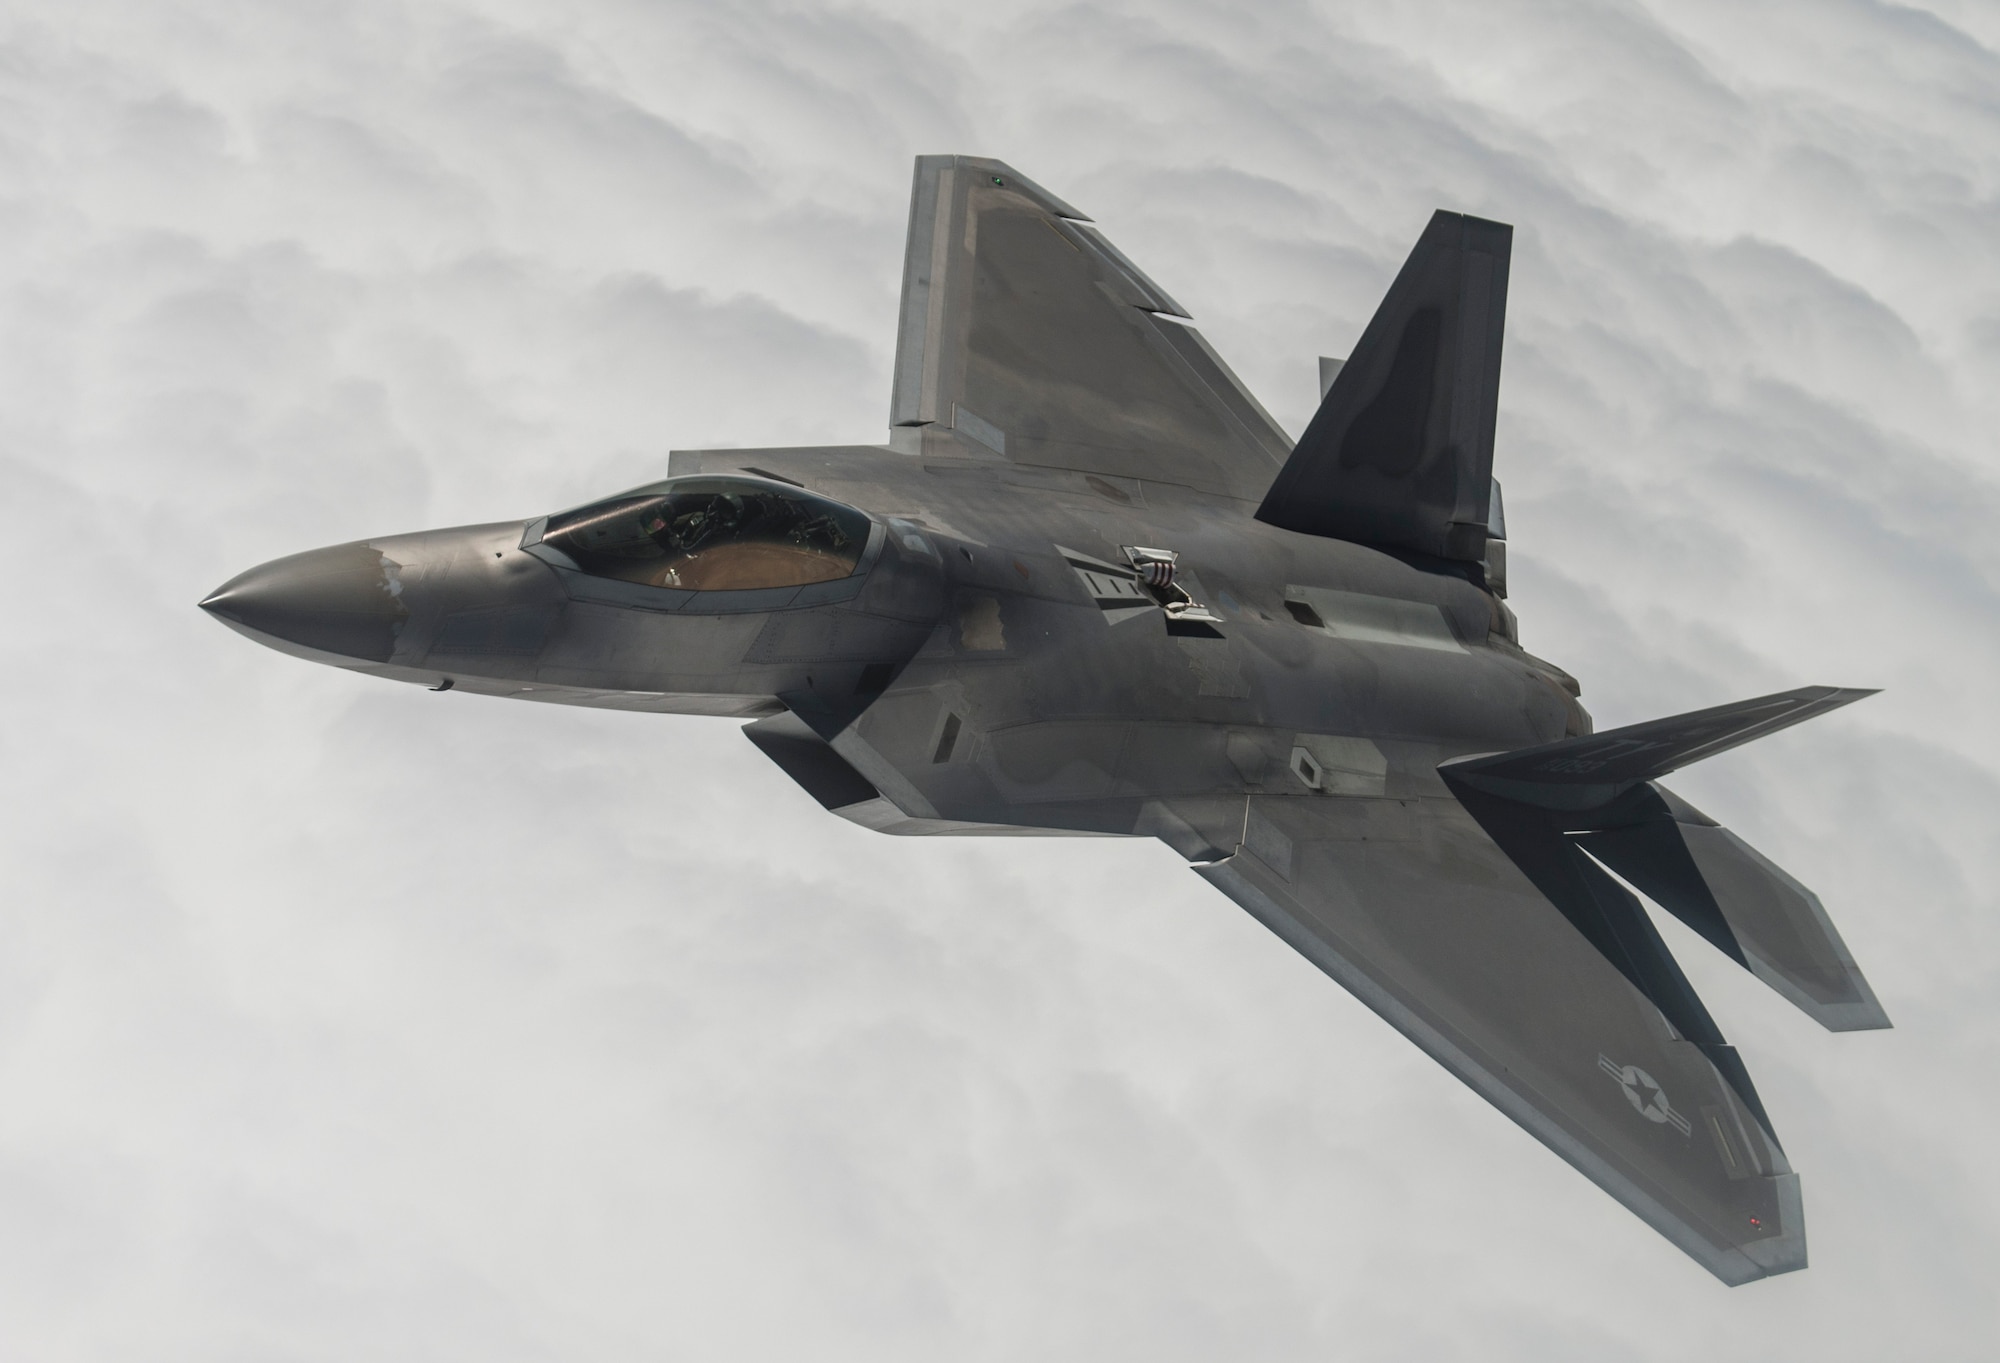 An F-22A Raptor from the 95th Fighter Squadron at Tyndall Air Force Base, Fla., flies over the Nevada Test and Training Range during Red Flag 15-3 at Nellis AFB, Nev., July 31, 2015. Red Flag gives aircrews and air support operations service members from various airframes, military services and allied countries an opportunity to integrate and practice combat operations. (U.S. Air Force photo/Senior Airman Brittany A. Chase)